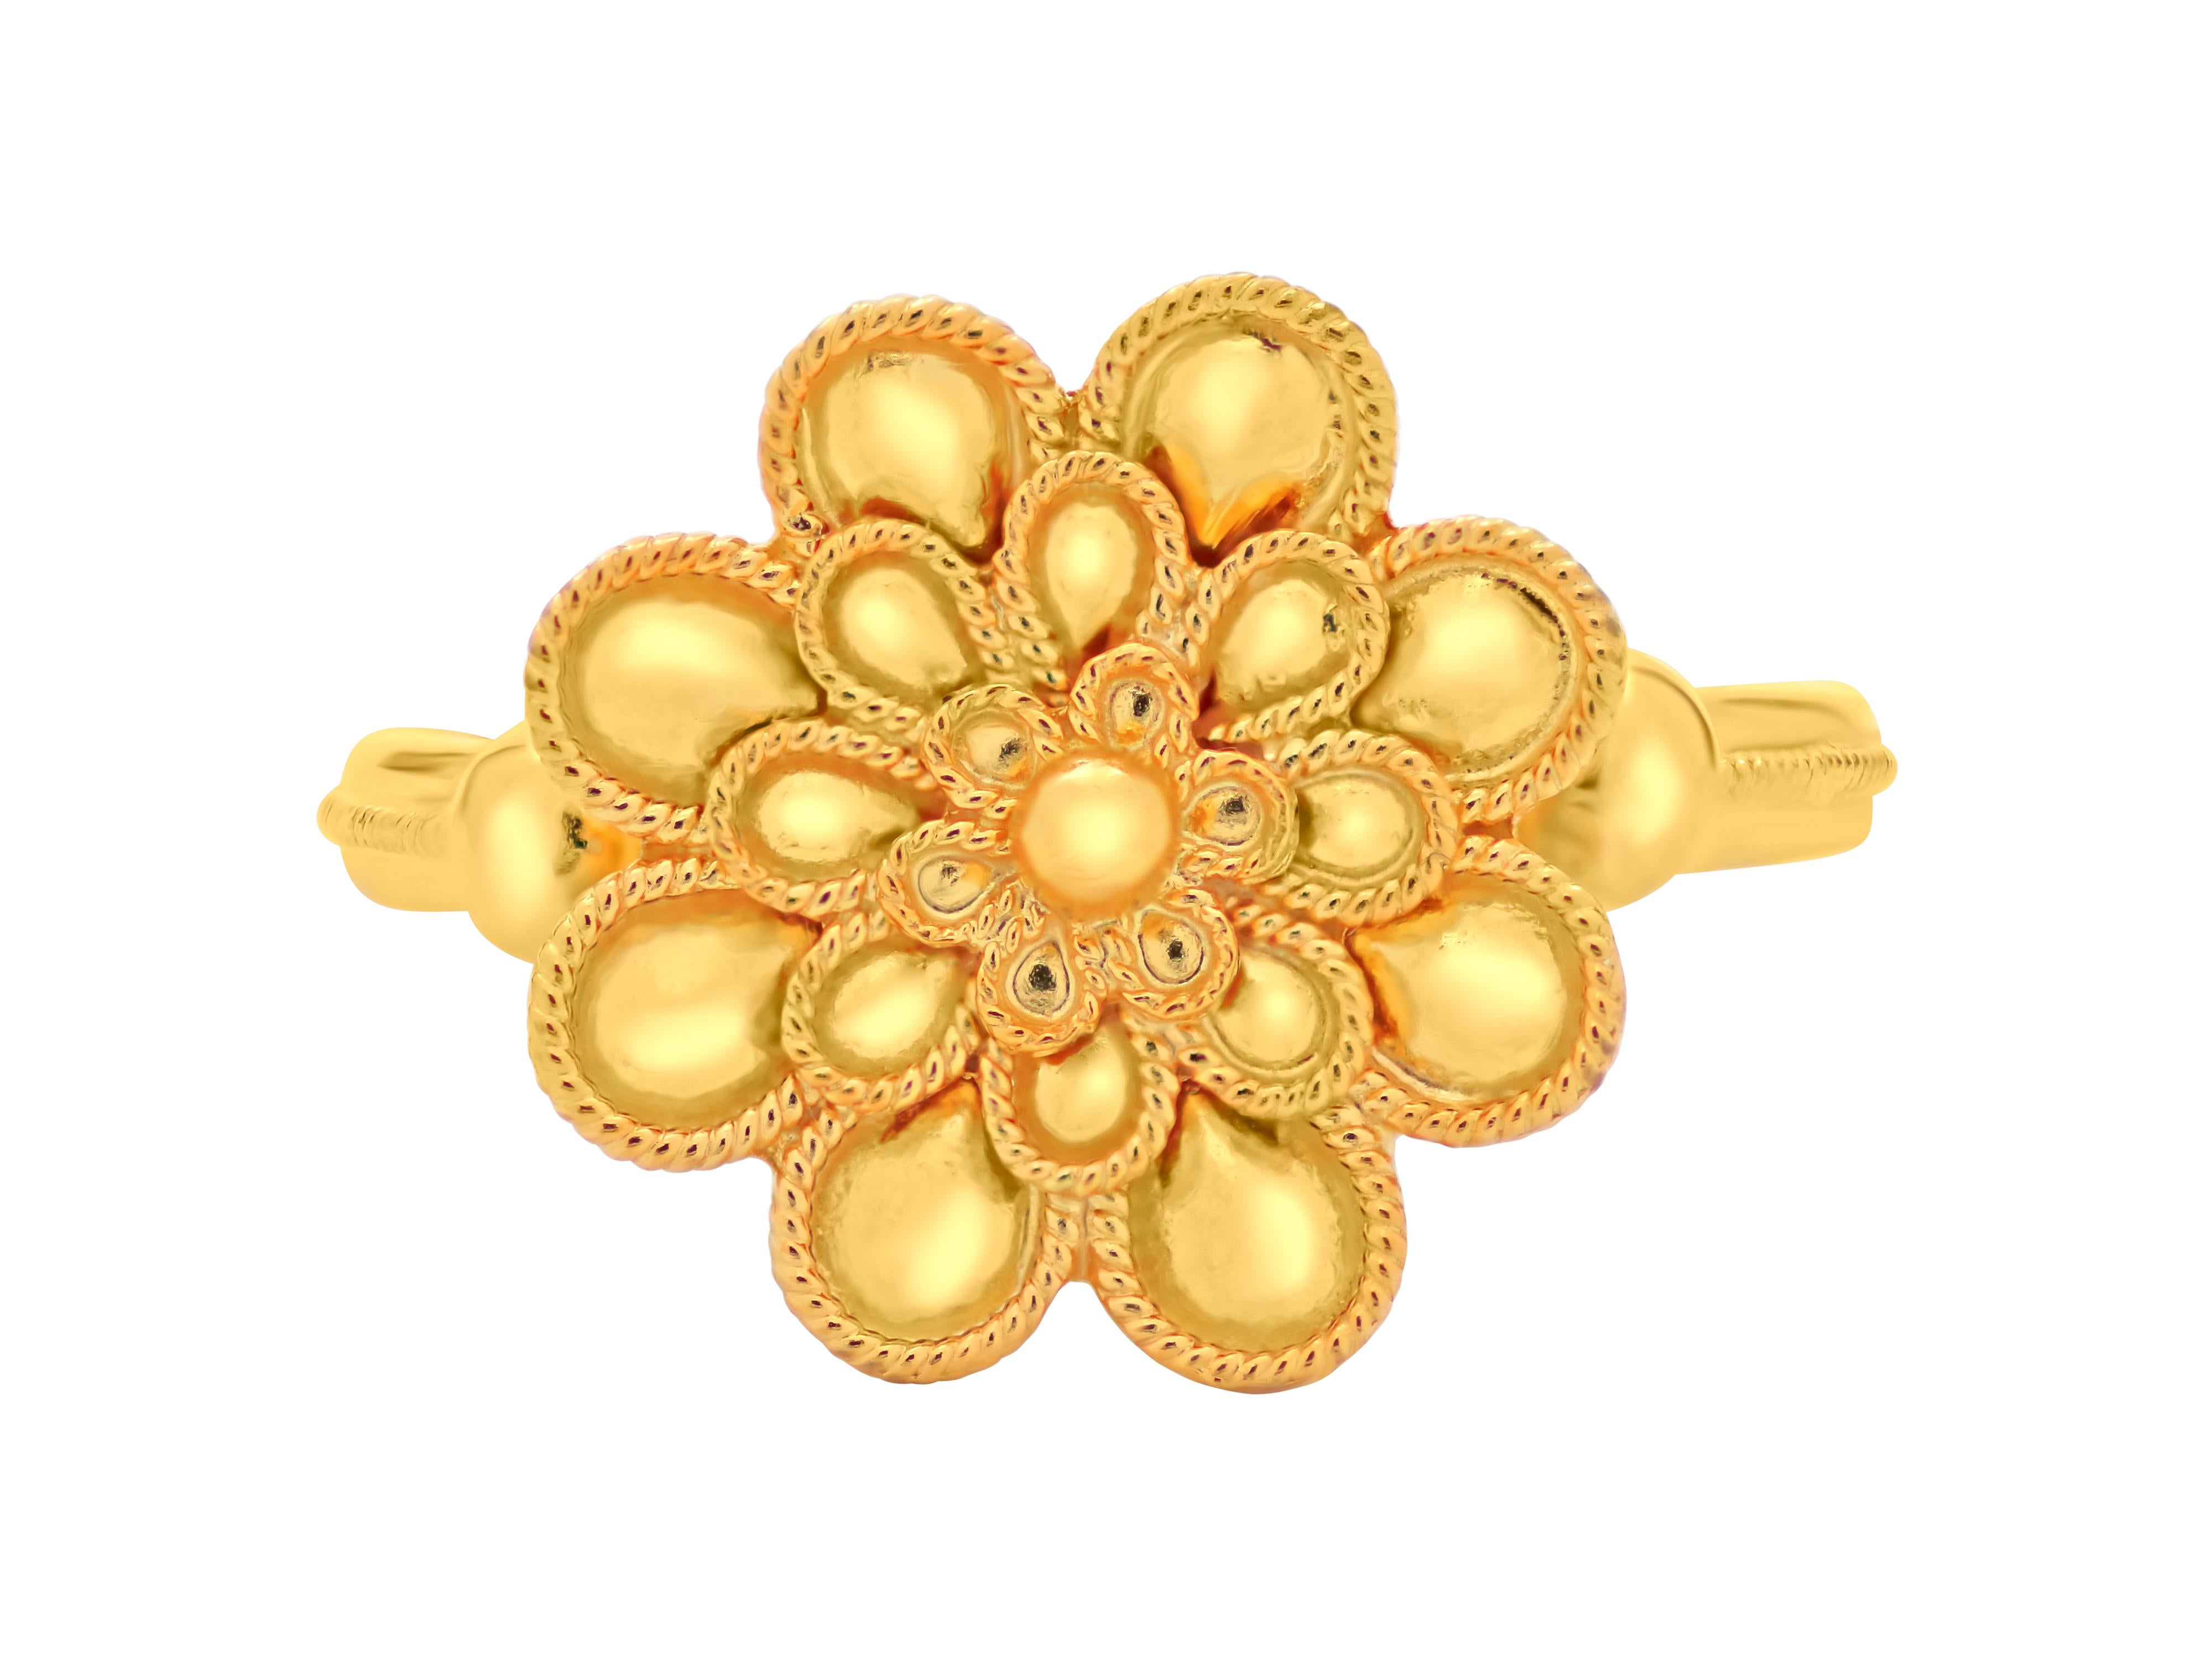 The rosette ring in its triple version set in 18k yellow gold. A museum legend that it’s been so presented in our history here in triple leaf with filigrees. Thin band for comfort wear also with filigree decoration.